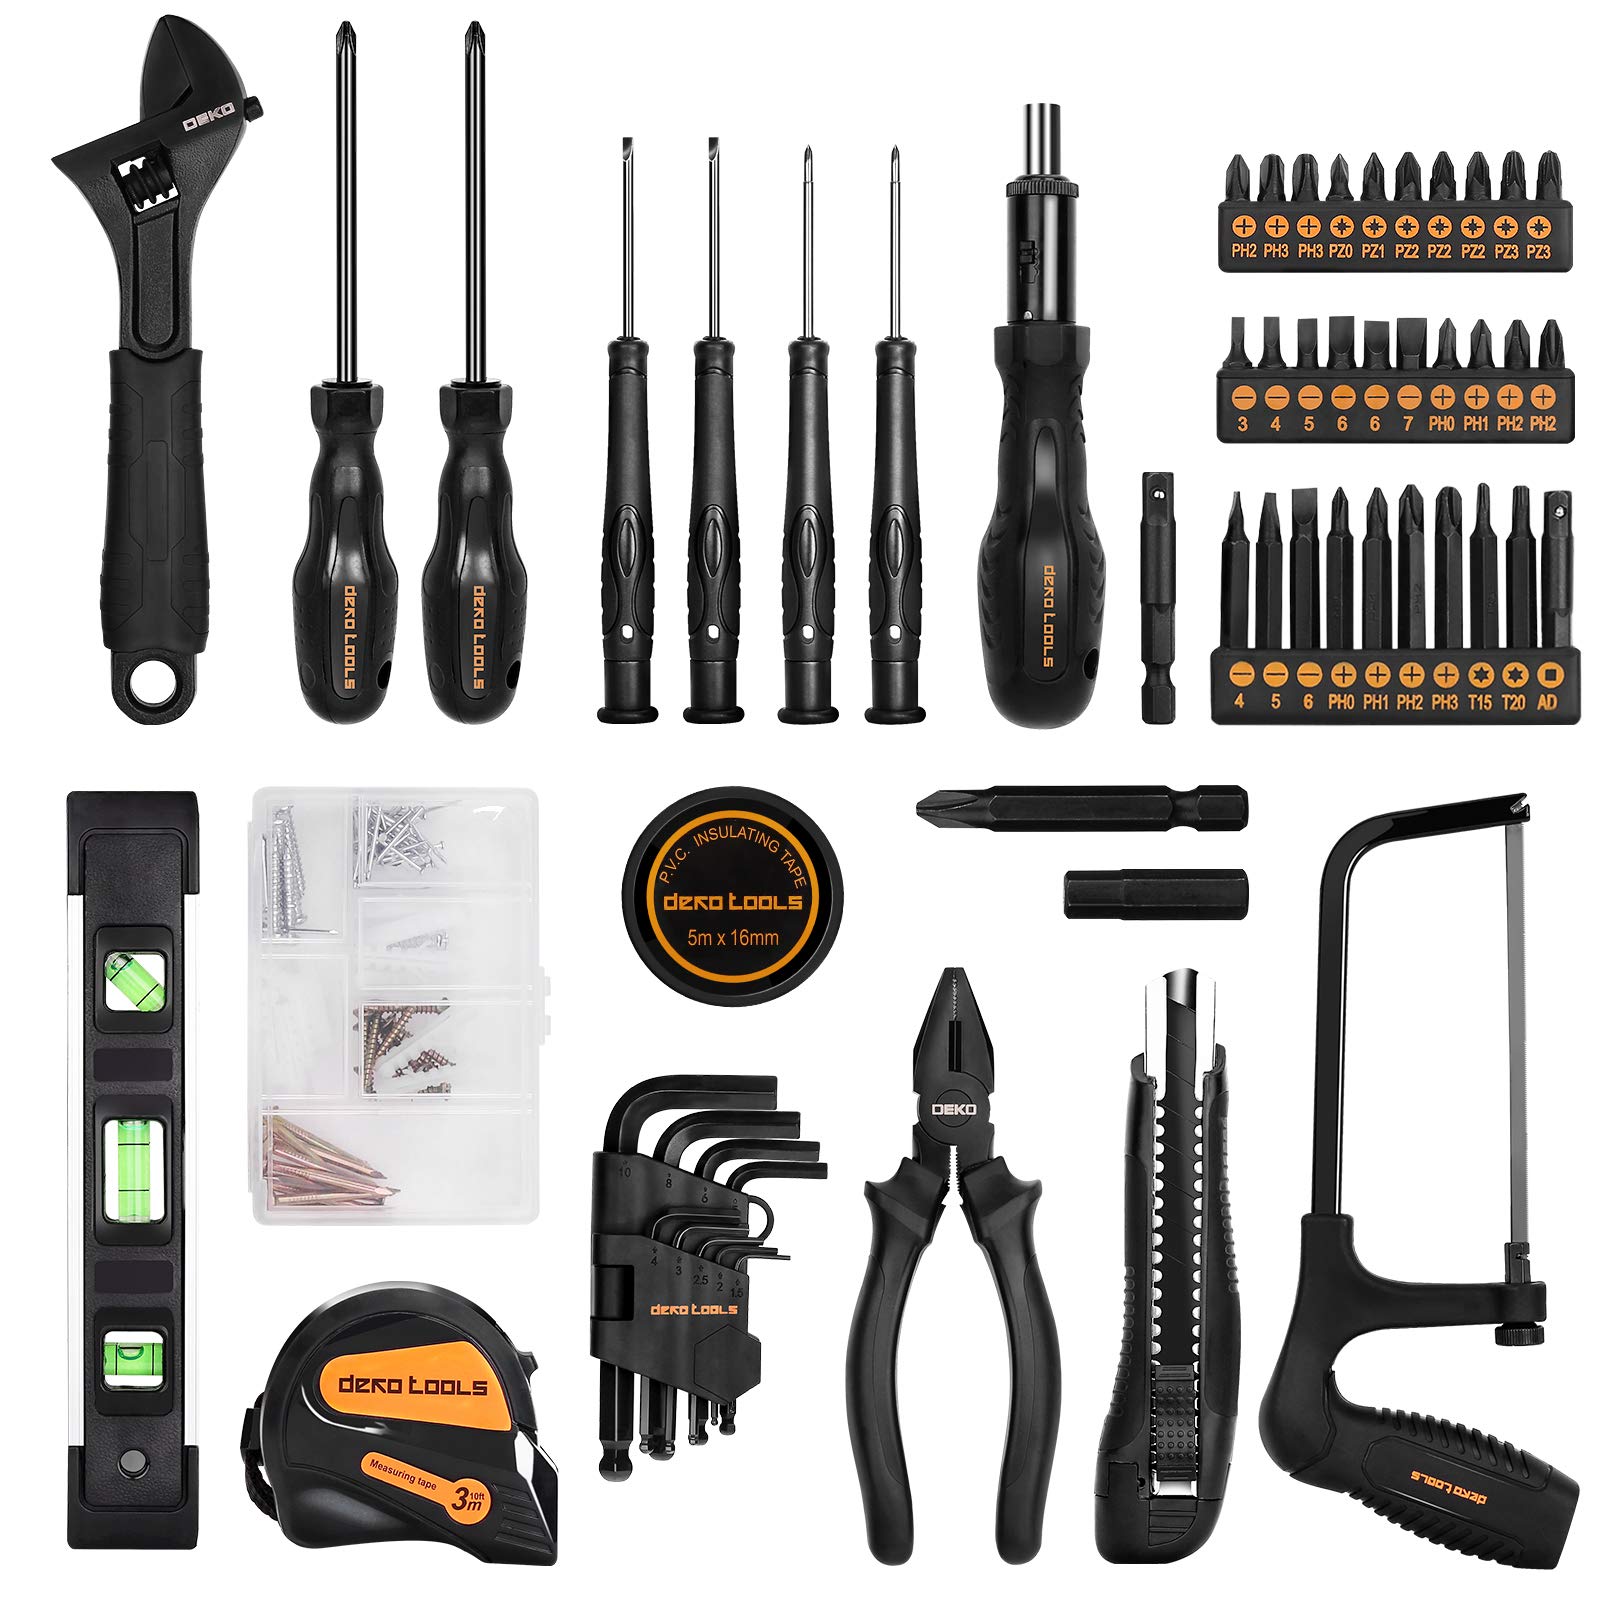 218-Piece General Household Hand Tool kit, Professional Auto Repair Tool Set  for Homeowner, General Household Hand Tool Set with Plier, Screwdriver Set,  Socket Set, with Portable Storage Case